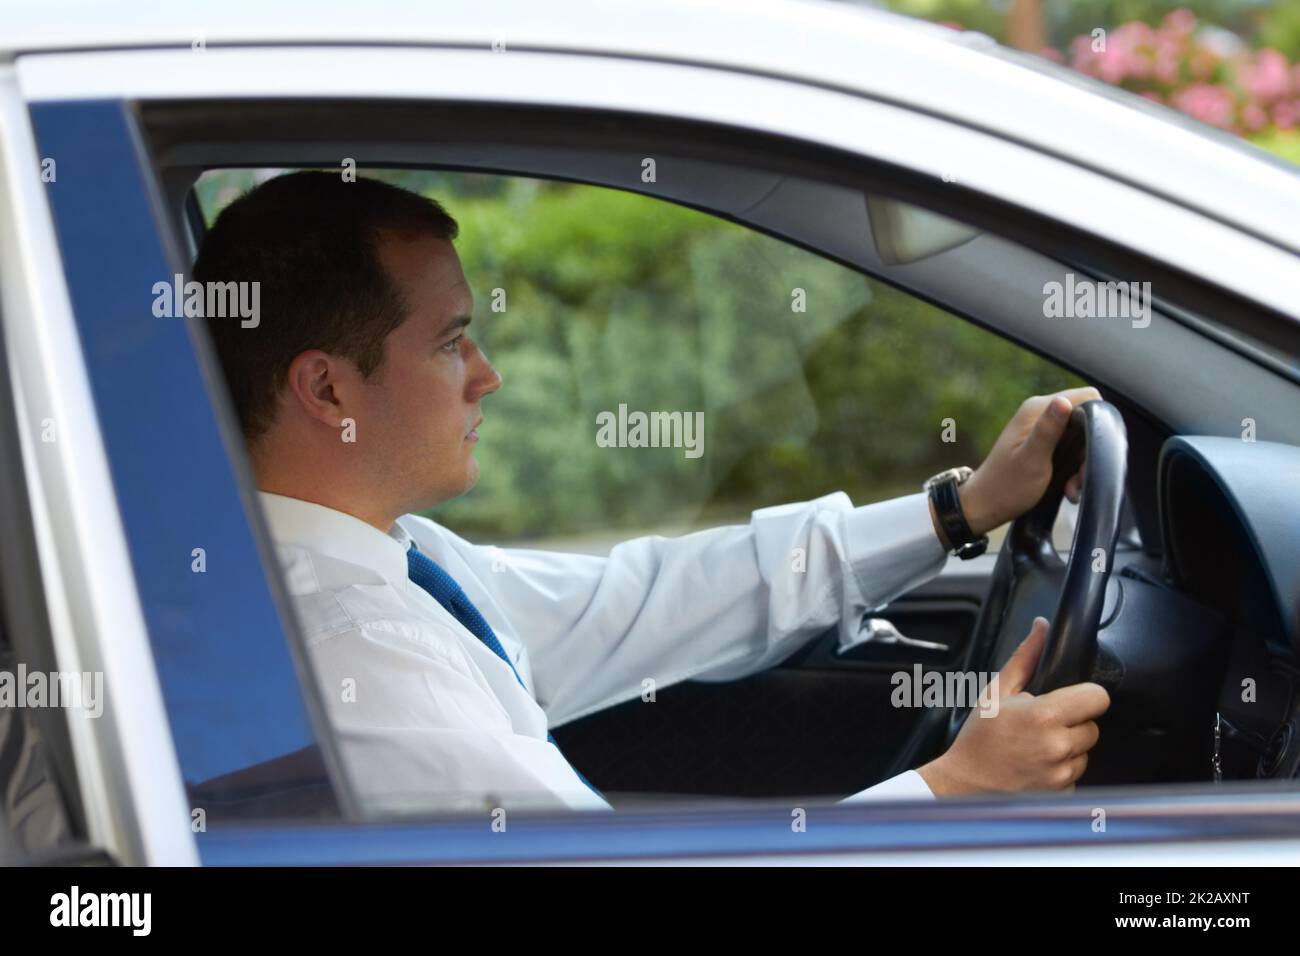 The daily commute. Profile of a businessman driving his car to work. Stock Photo